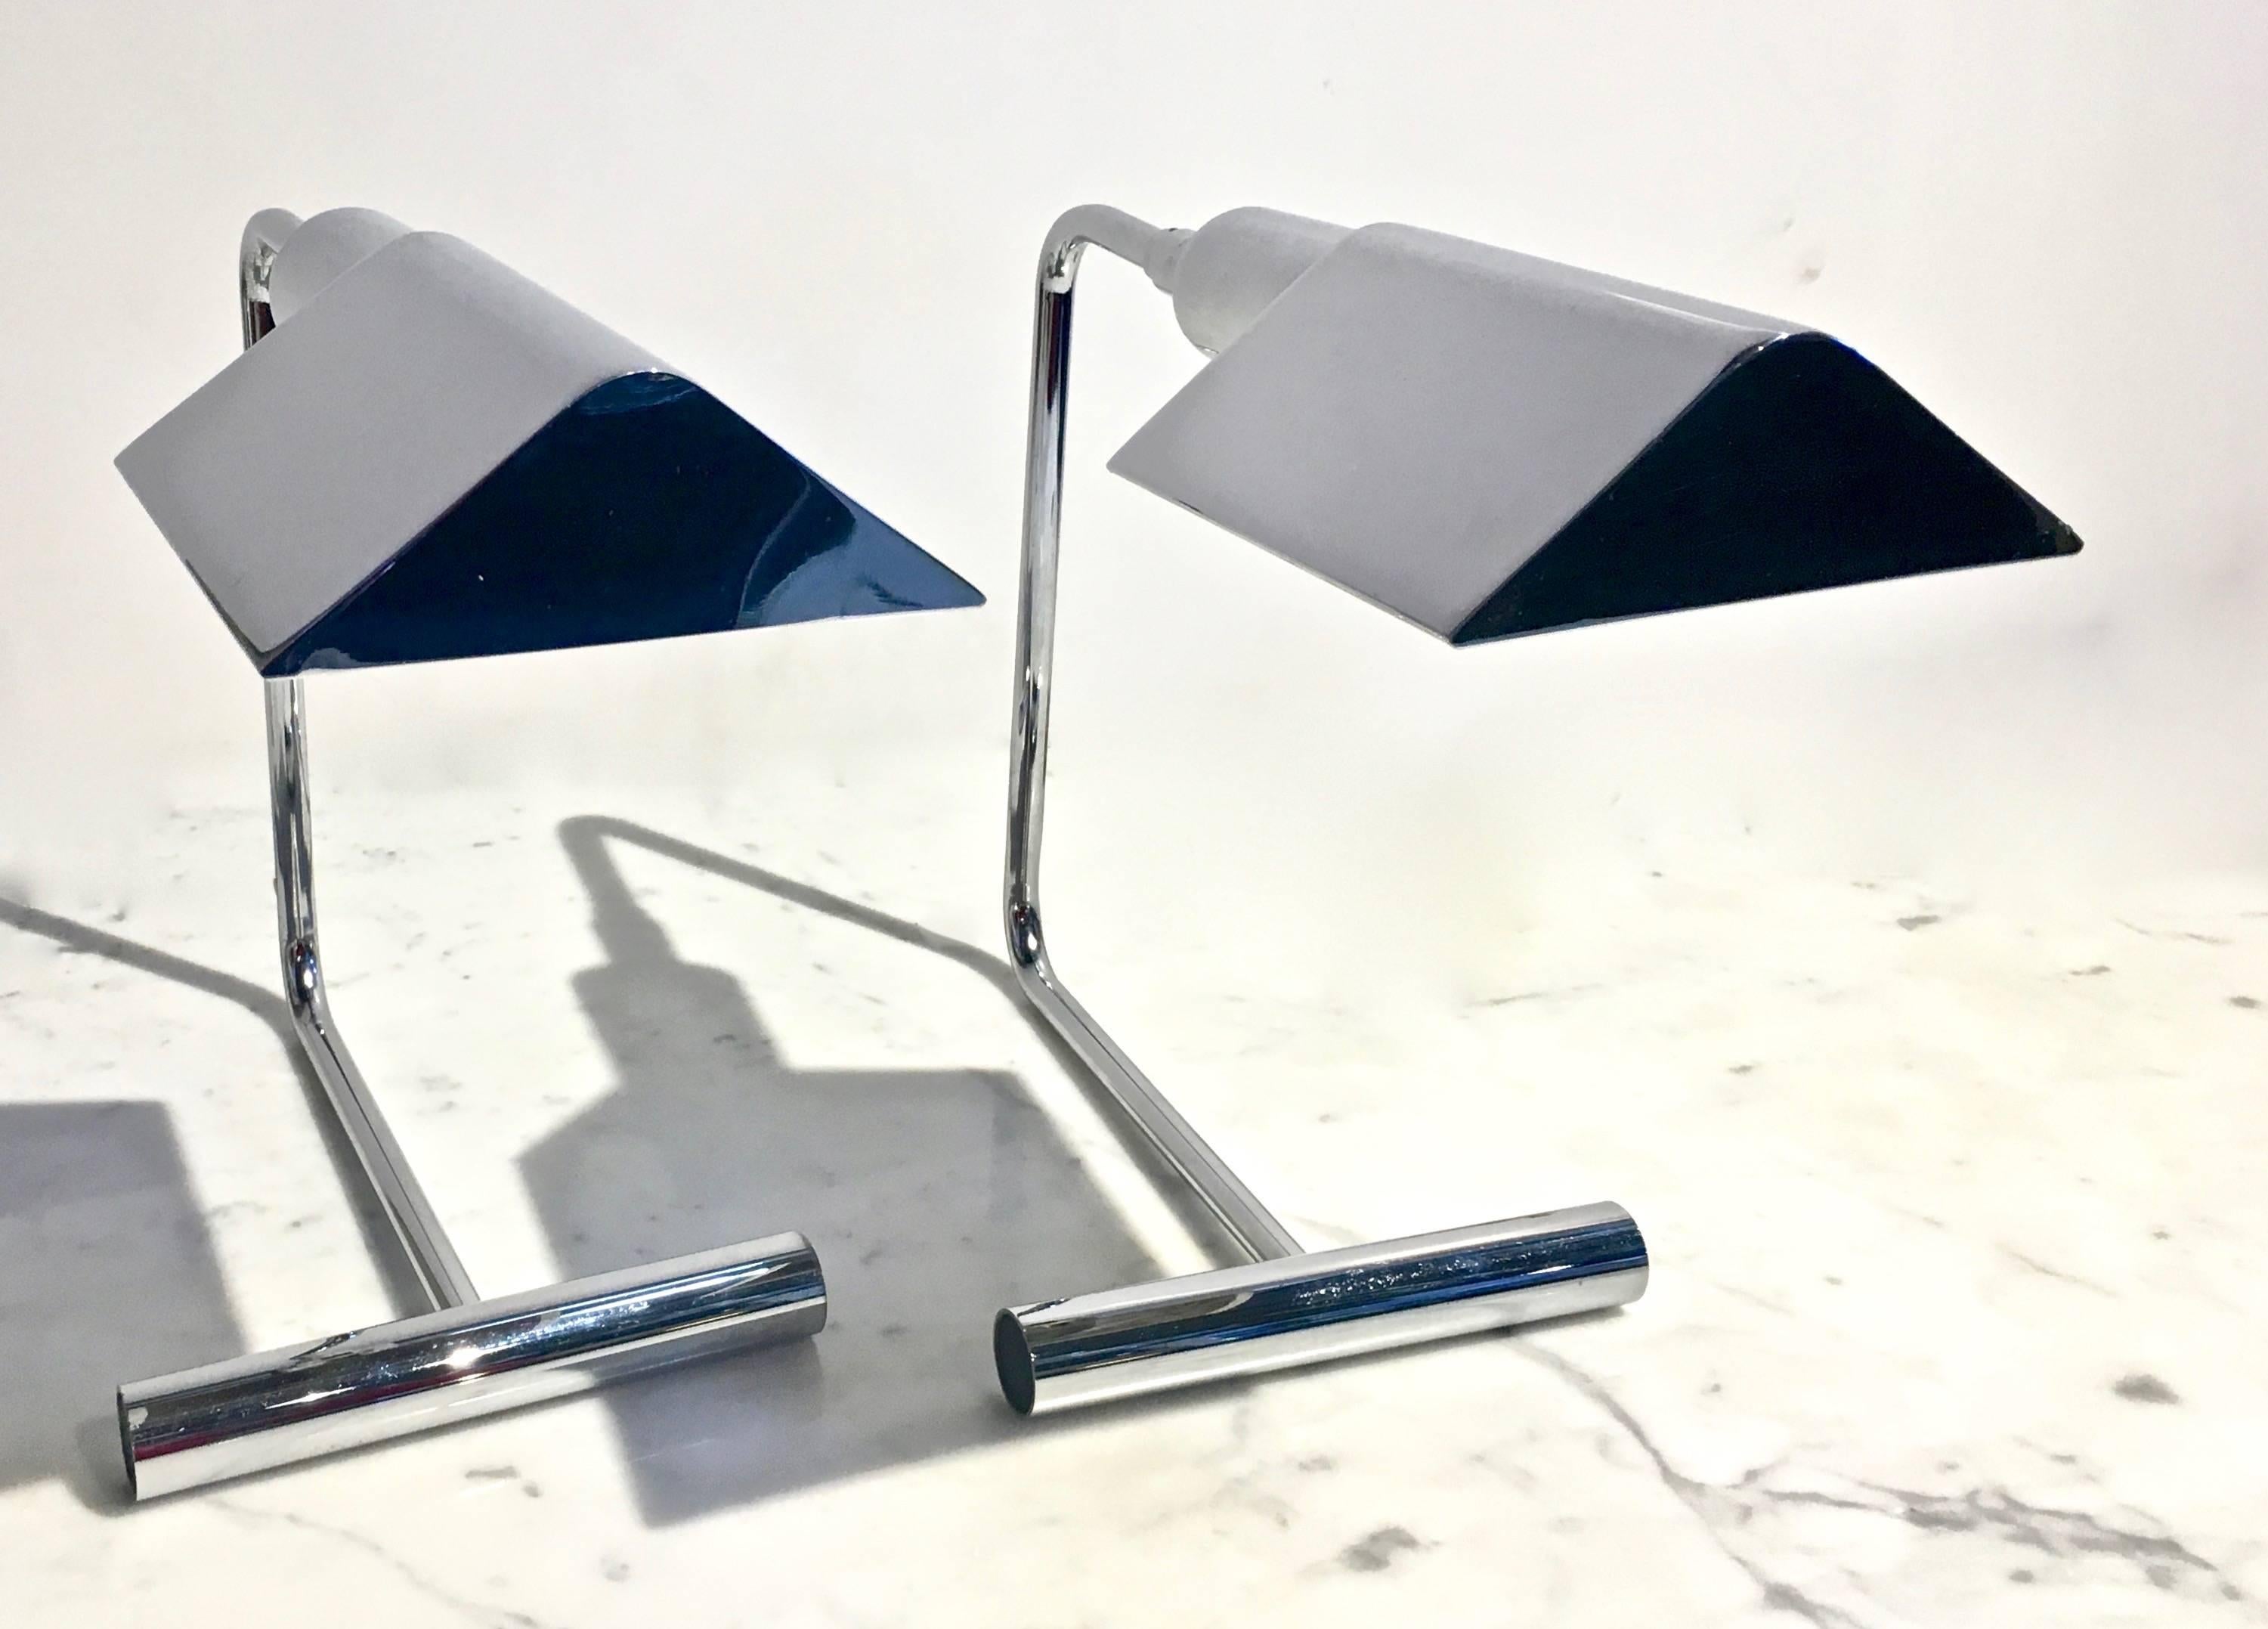 Really clean pair of chrome table lamps stamped by Koch + Lowy table lamps by OMI, circa 1960s-1970s. 
This architectural pair of table lamps are designed with an articulating shade and a dimmer switch for Directional and adjustable lighting. The